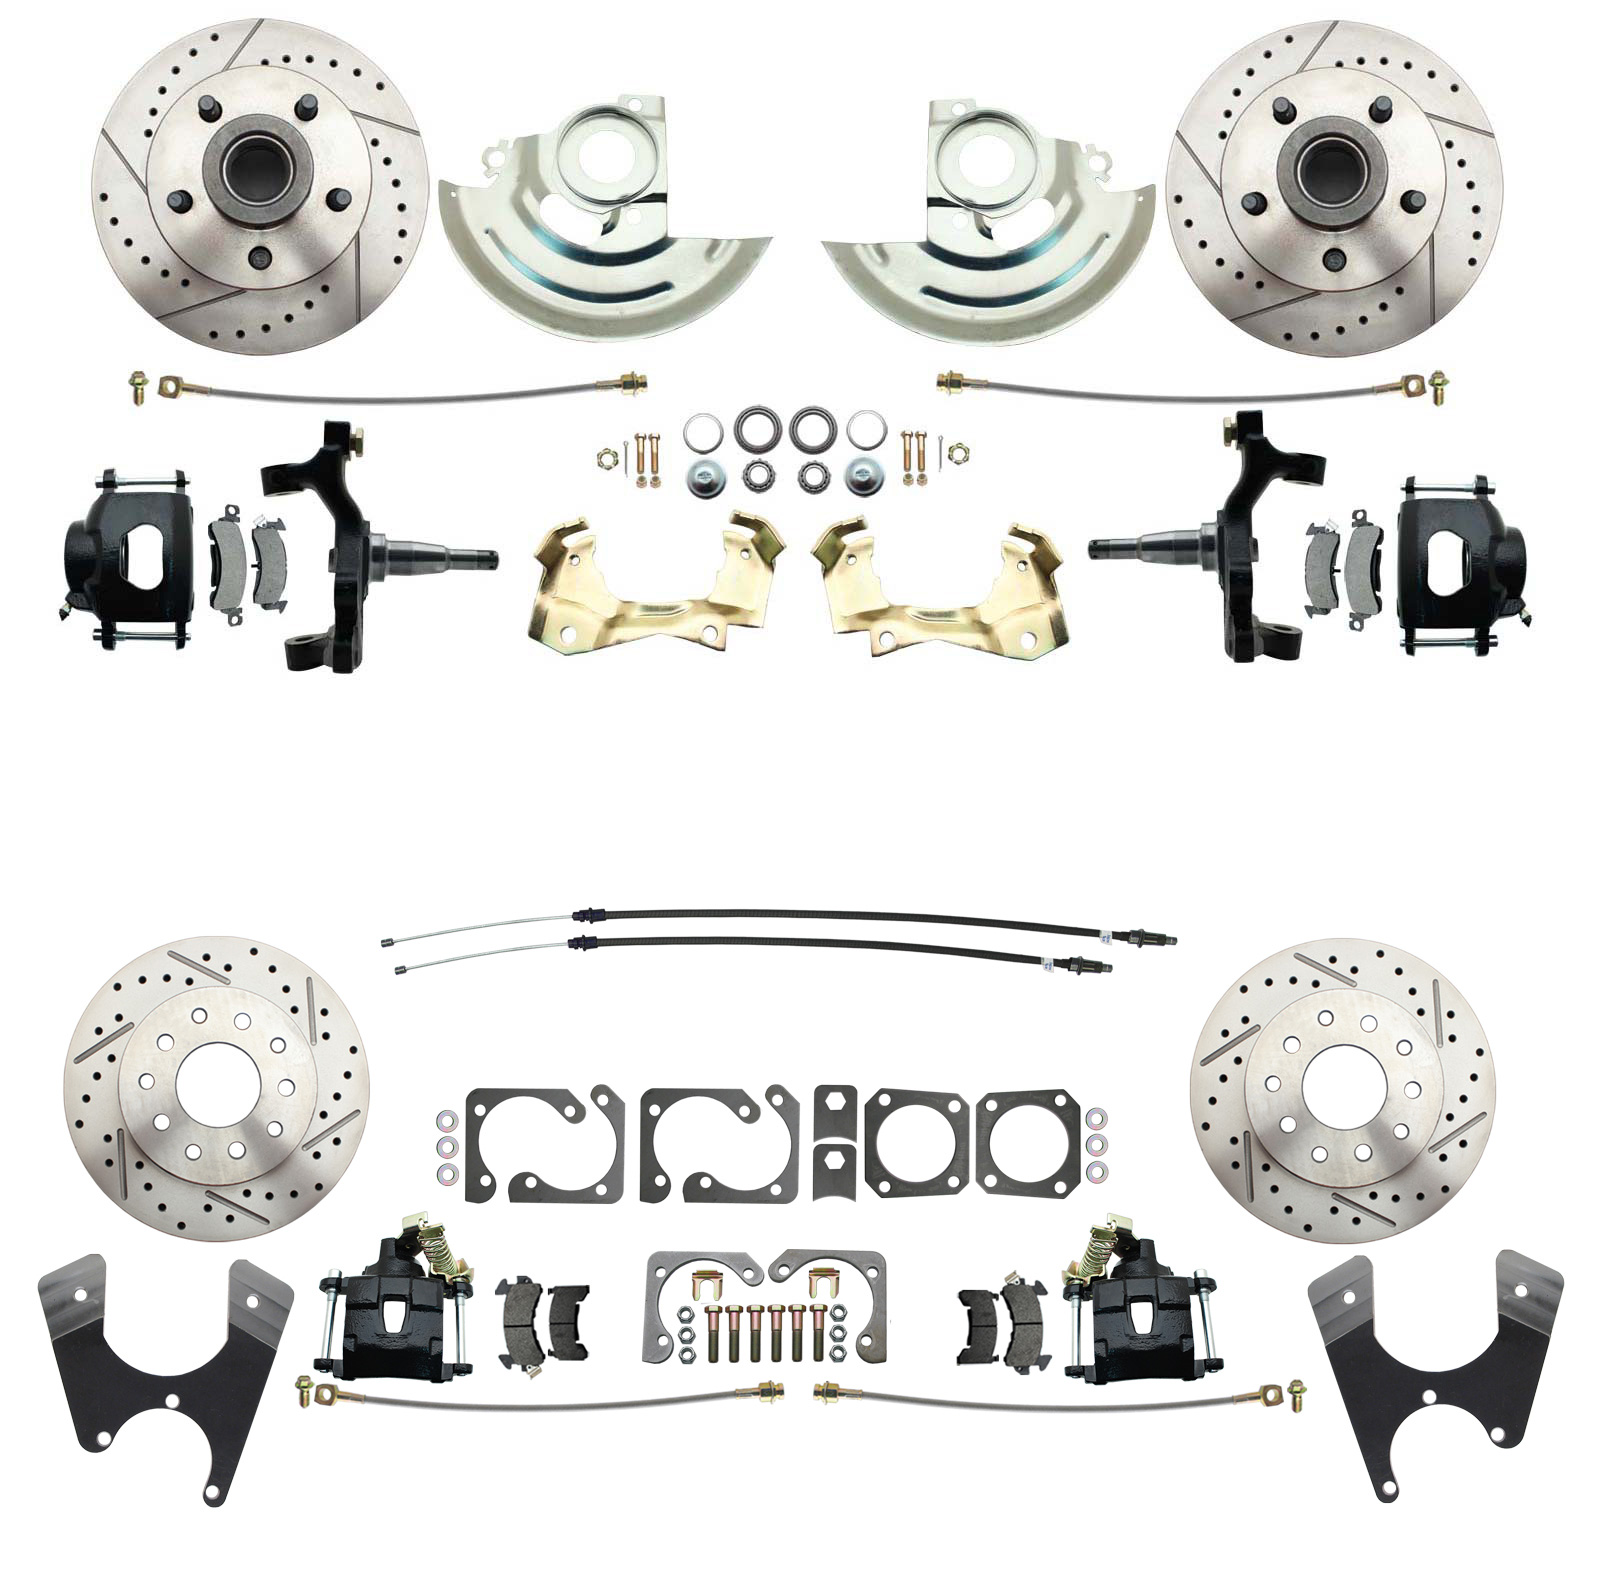 1964-1972 GM A Body (Chevelle, GTO, Cutlass) 2 Drop Front & Rear Disc Brake Kit W/ Drilled & Slotted Rotors Black Calipers